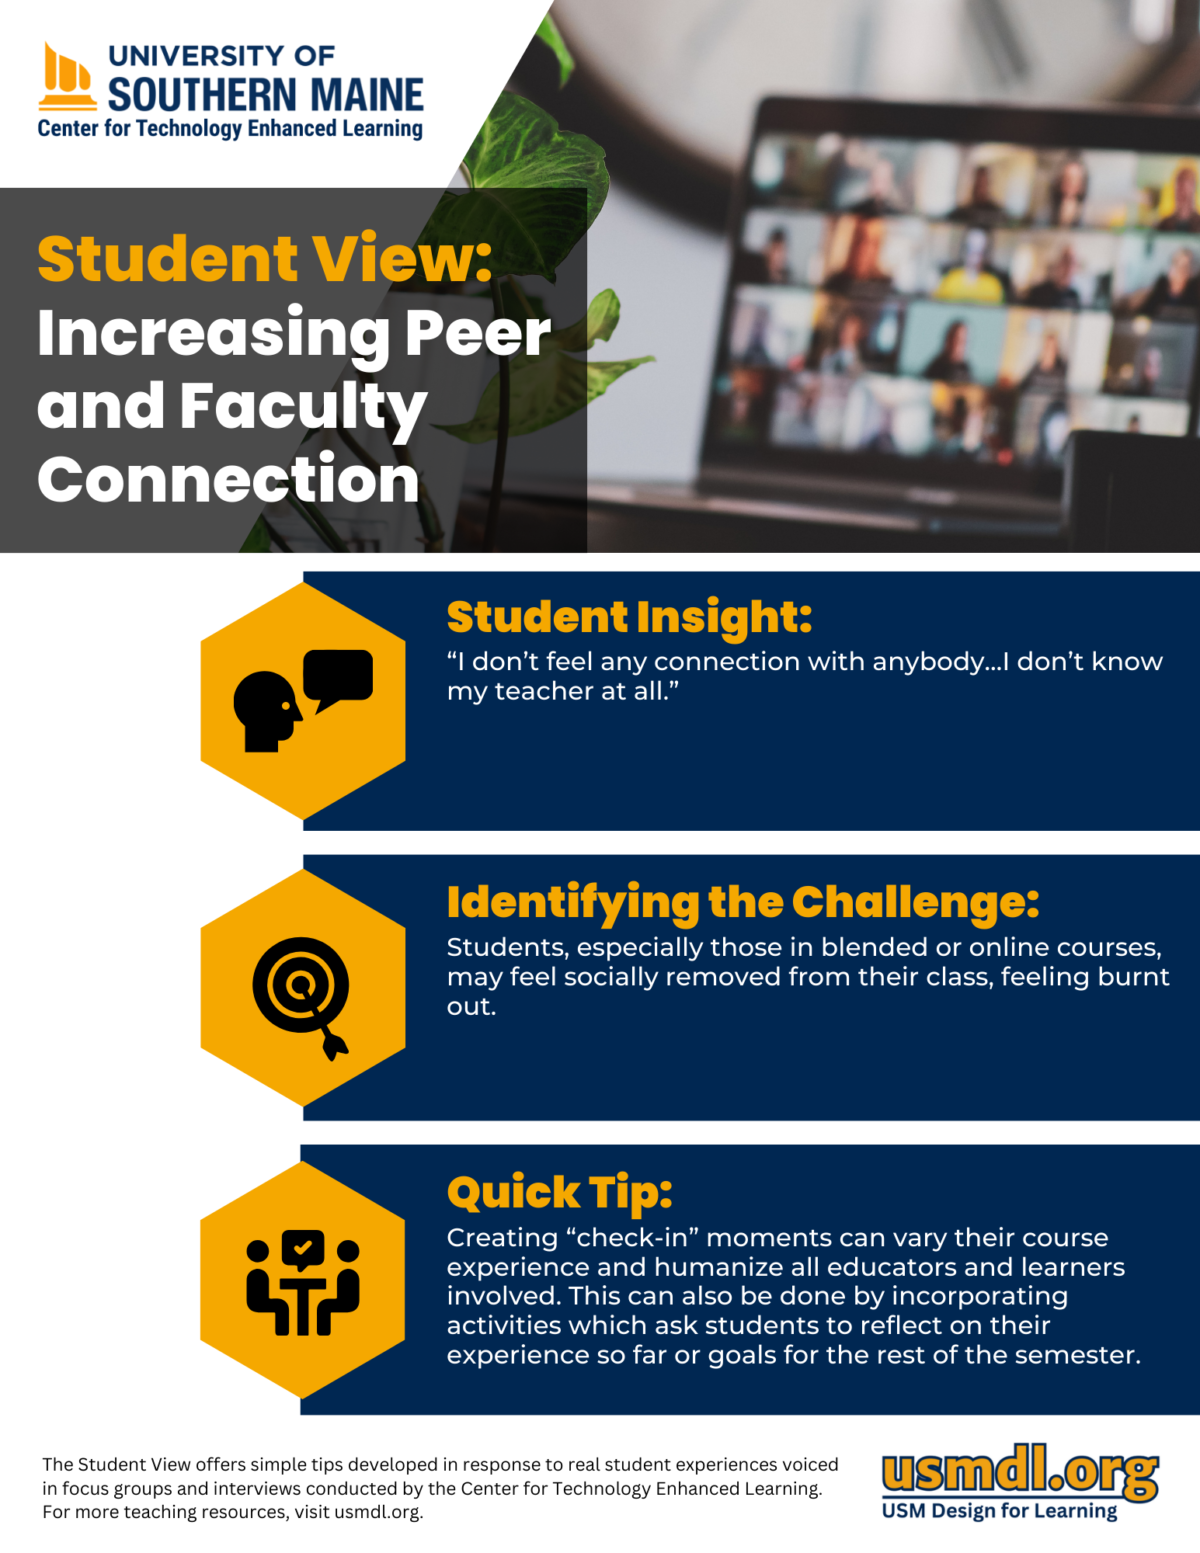 Increasing Peer and Faculty Connection infographic. All information in text following.